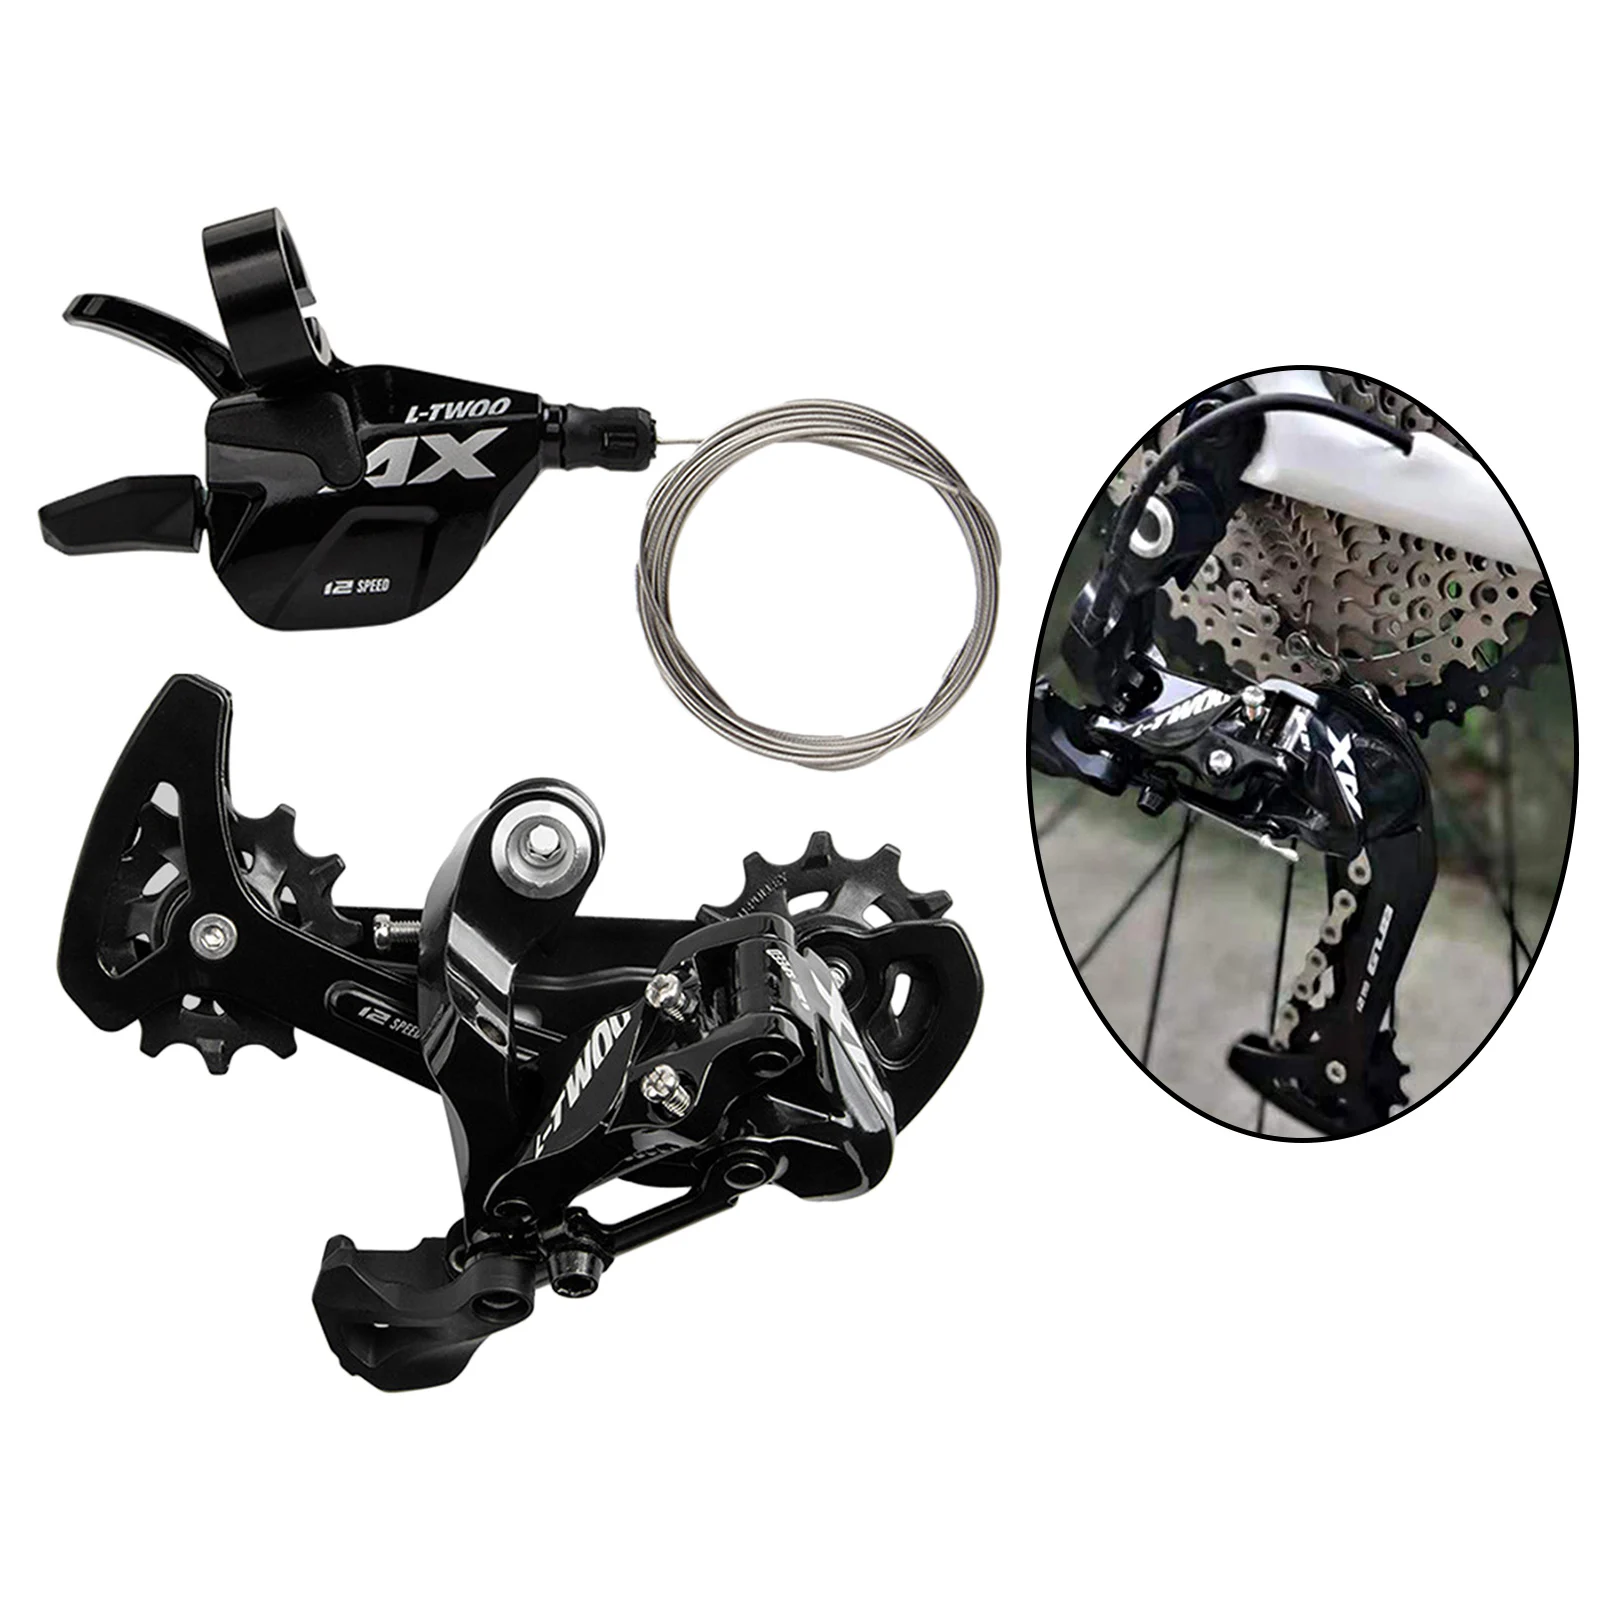 Bike Speed Shifter, Bicycle Right Shifter Rear Derailleur for Mountain Bike Bicycle